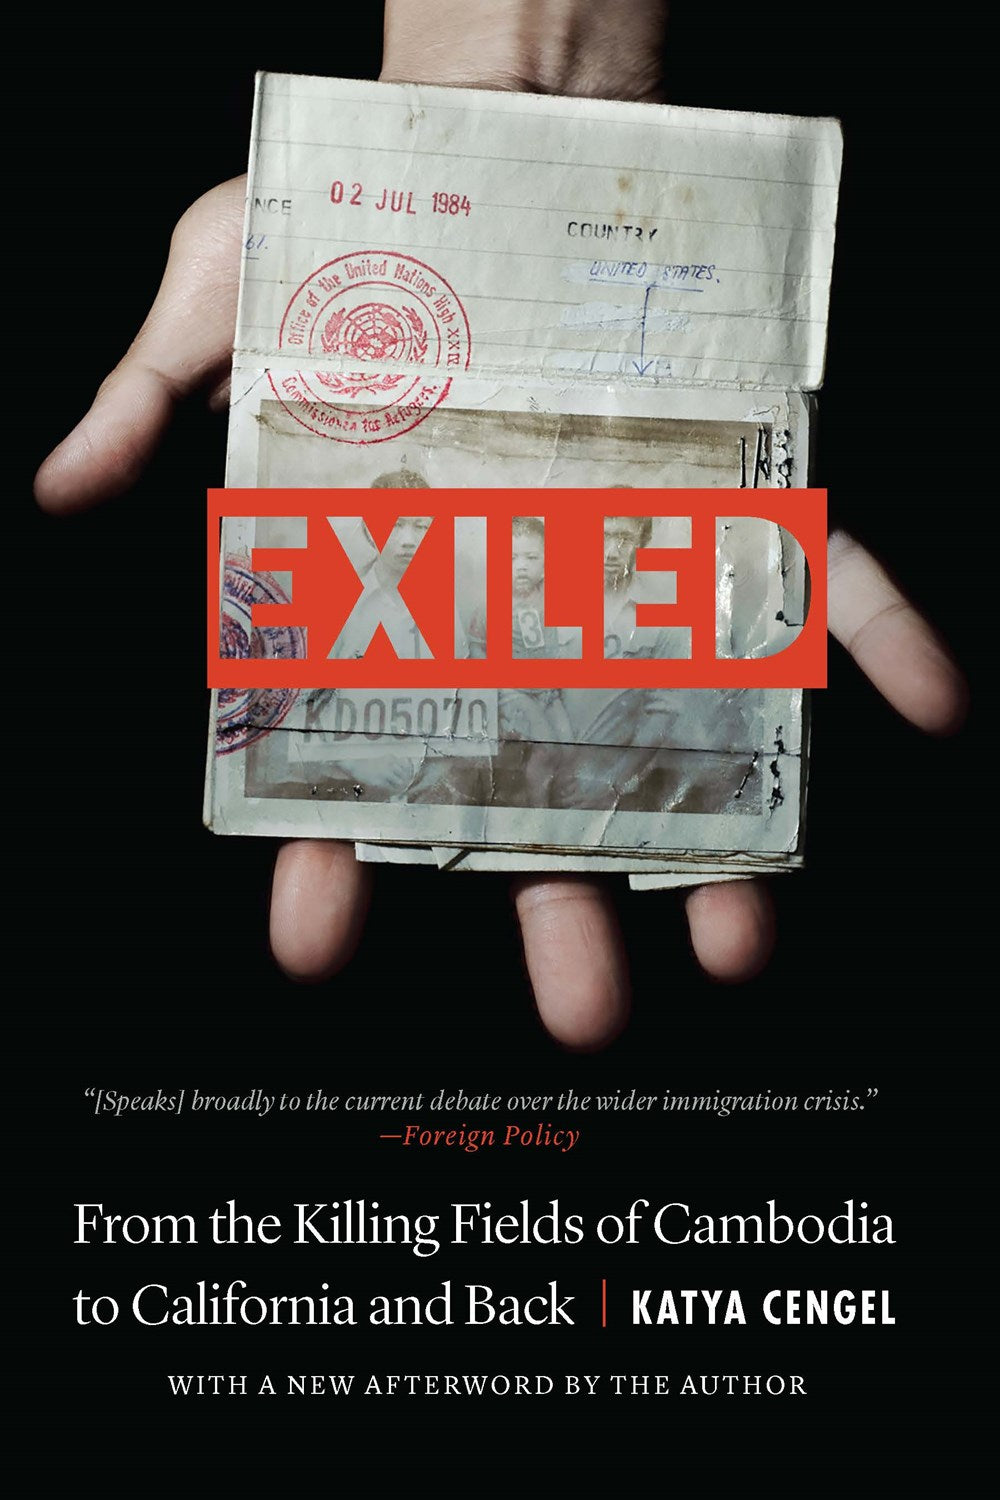 Exiled : From the Killing Fields of Cambodia to California and Back